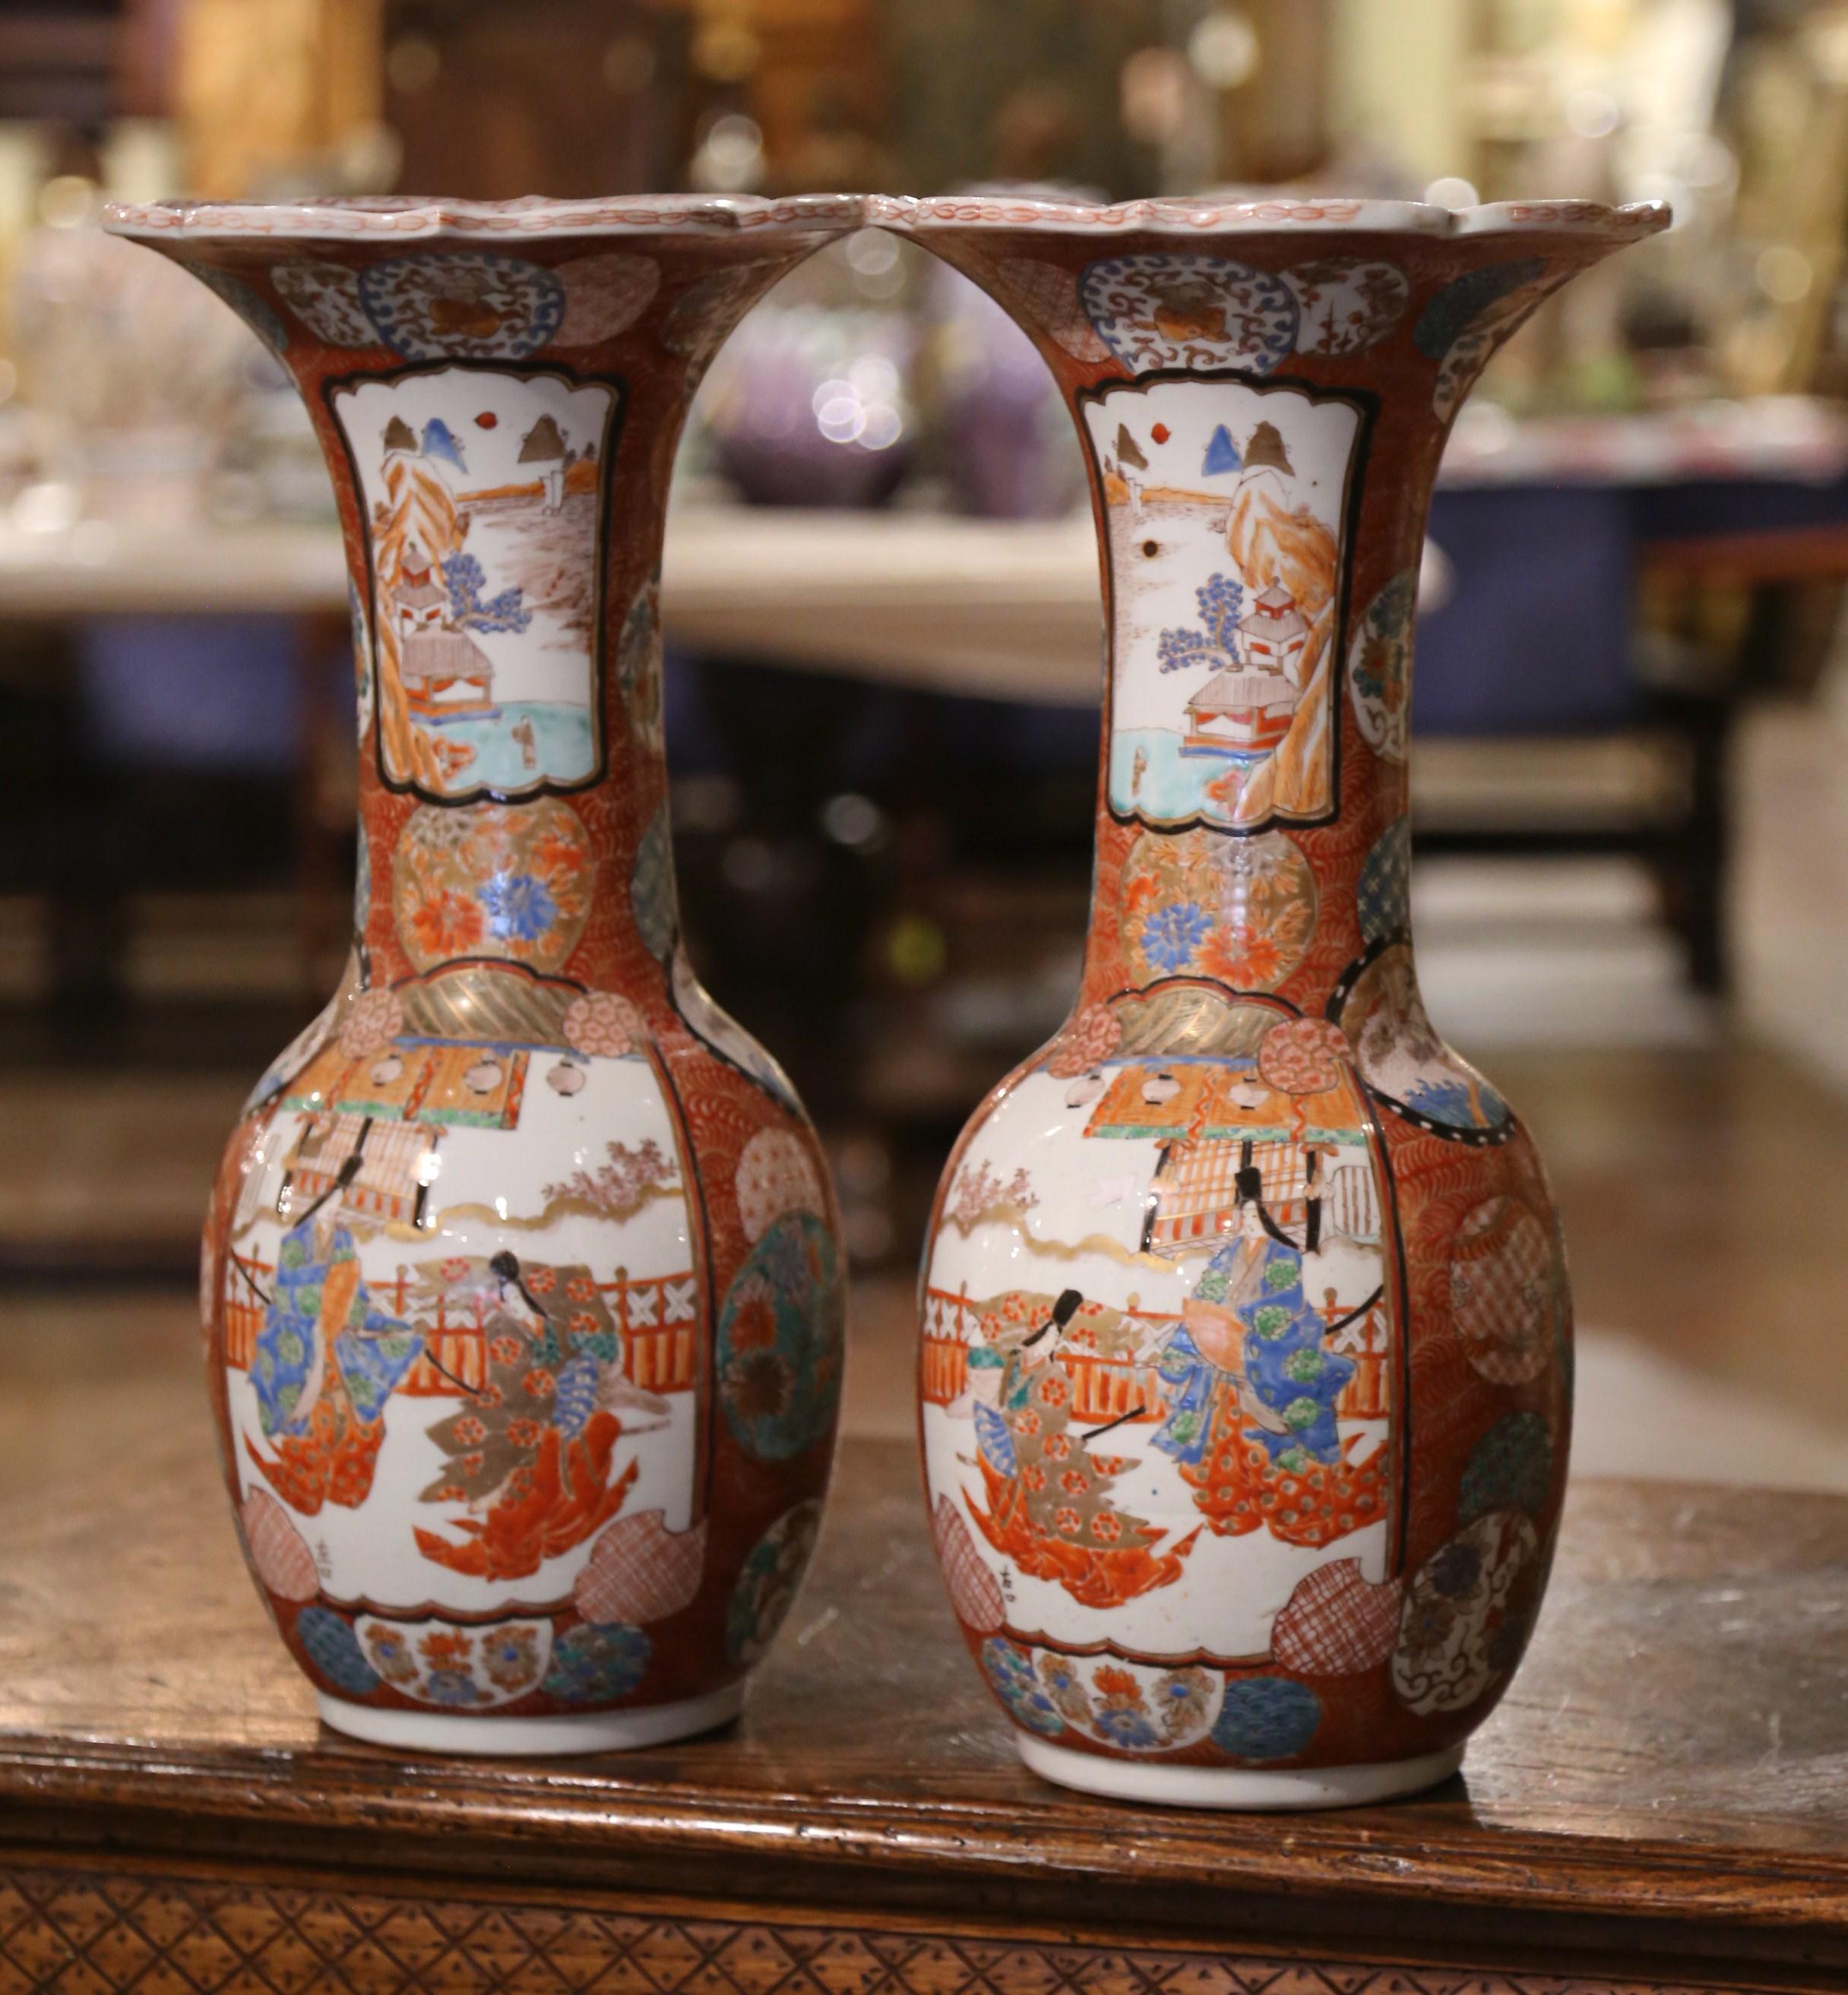 Make a beautiful statement in your living room by placing these large, antique vases on your mantle or console. Sculpted in Japan circa 1920, each porcelain Imari vase has an ovoid form, with long necks and open flared rims. The ceramic vases are